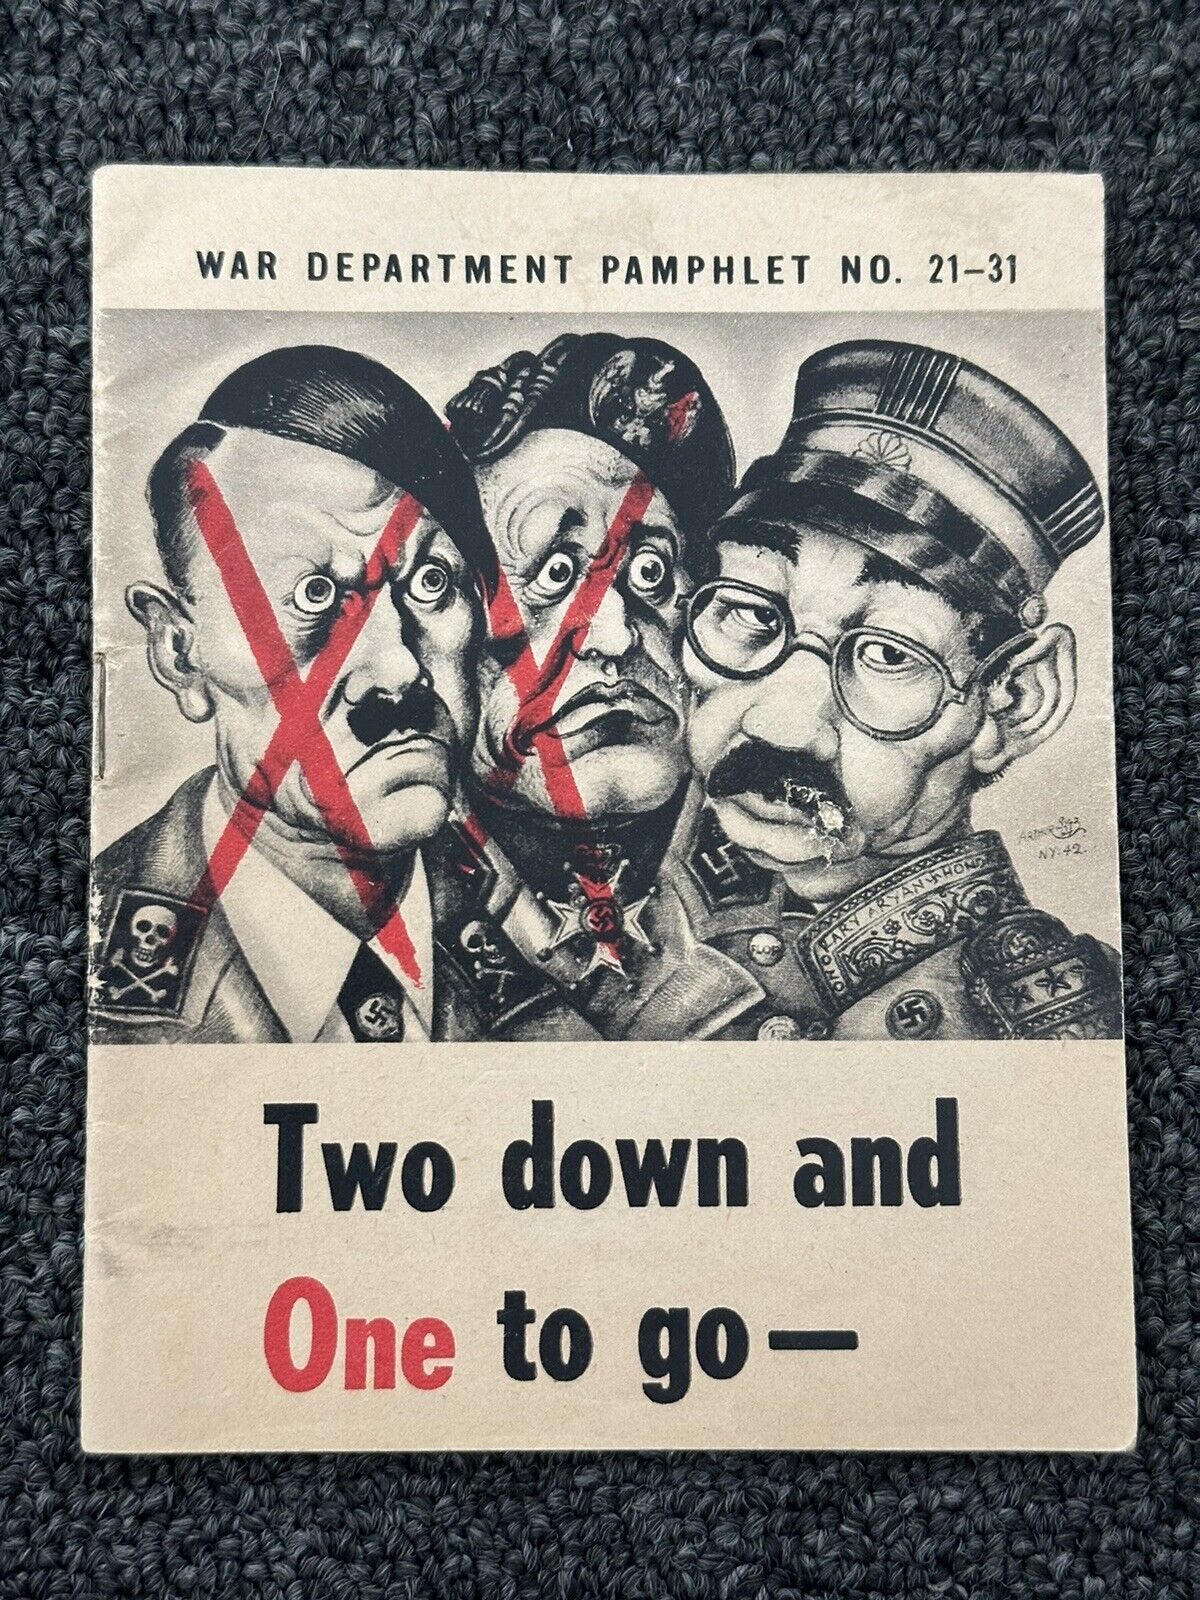 WW2 Pamphlet No. 21-31 Two down & One to go ANTI AXIS hitler mussolini 1945